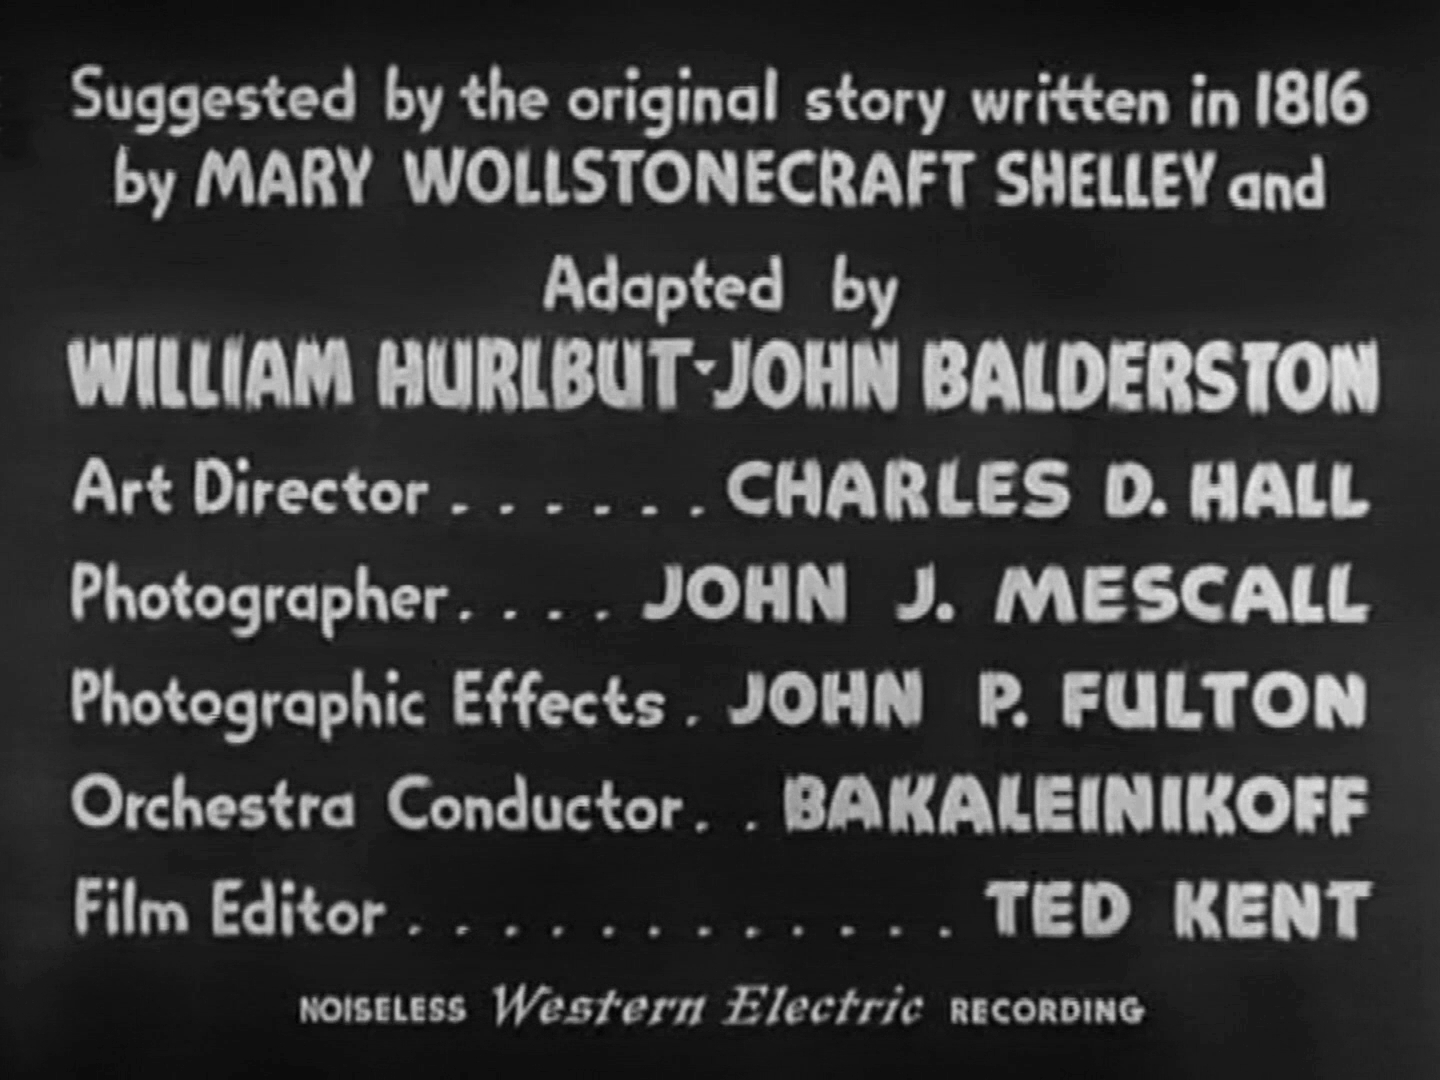 Main title from Bride of Frankenstein (1935) (6). Suggested by the original story written in 1816 by Mary Shelley